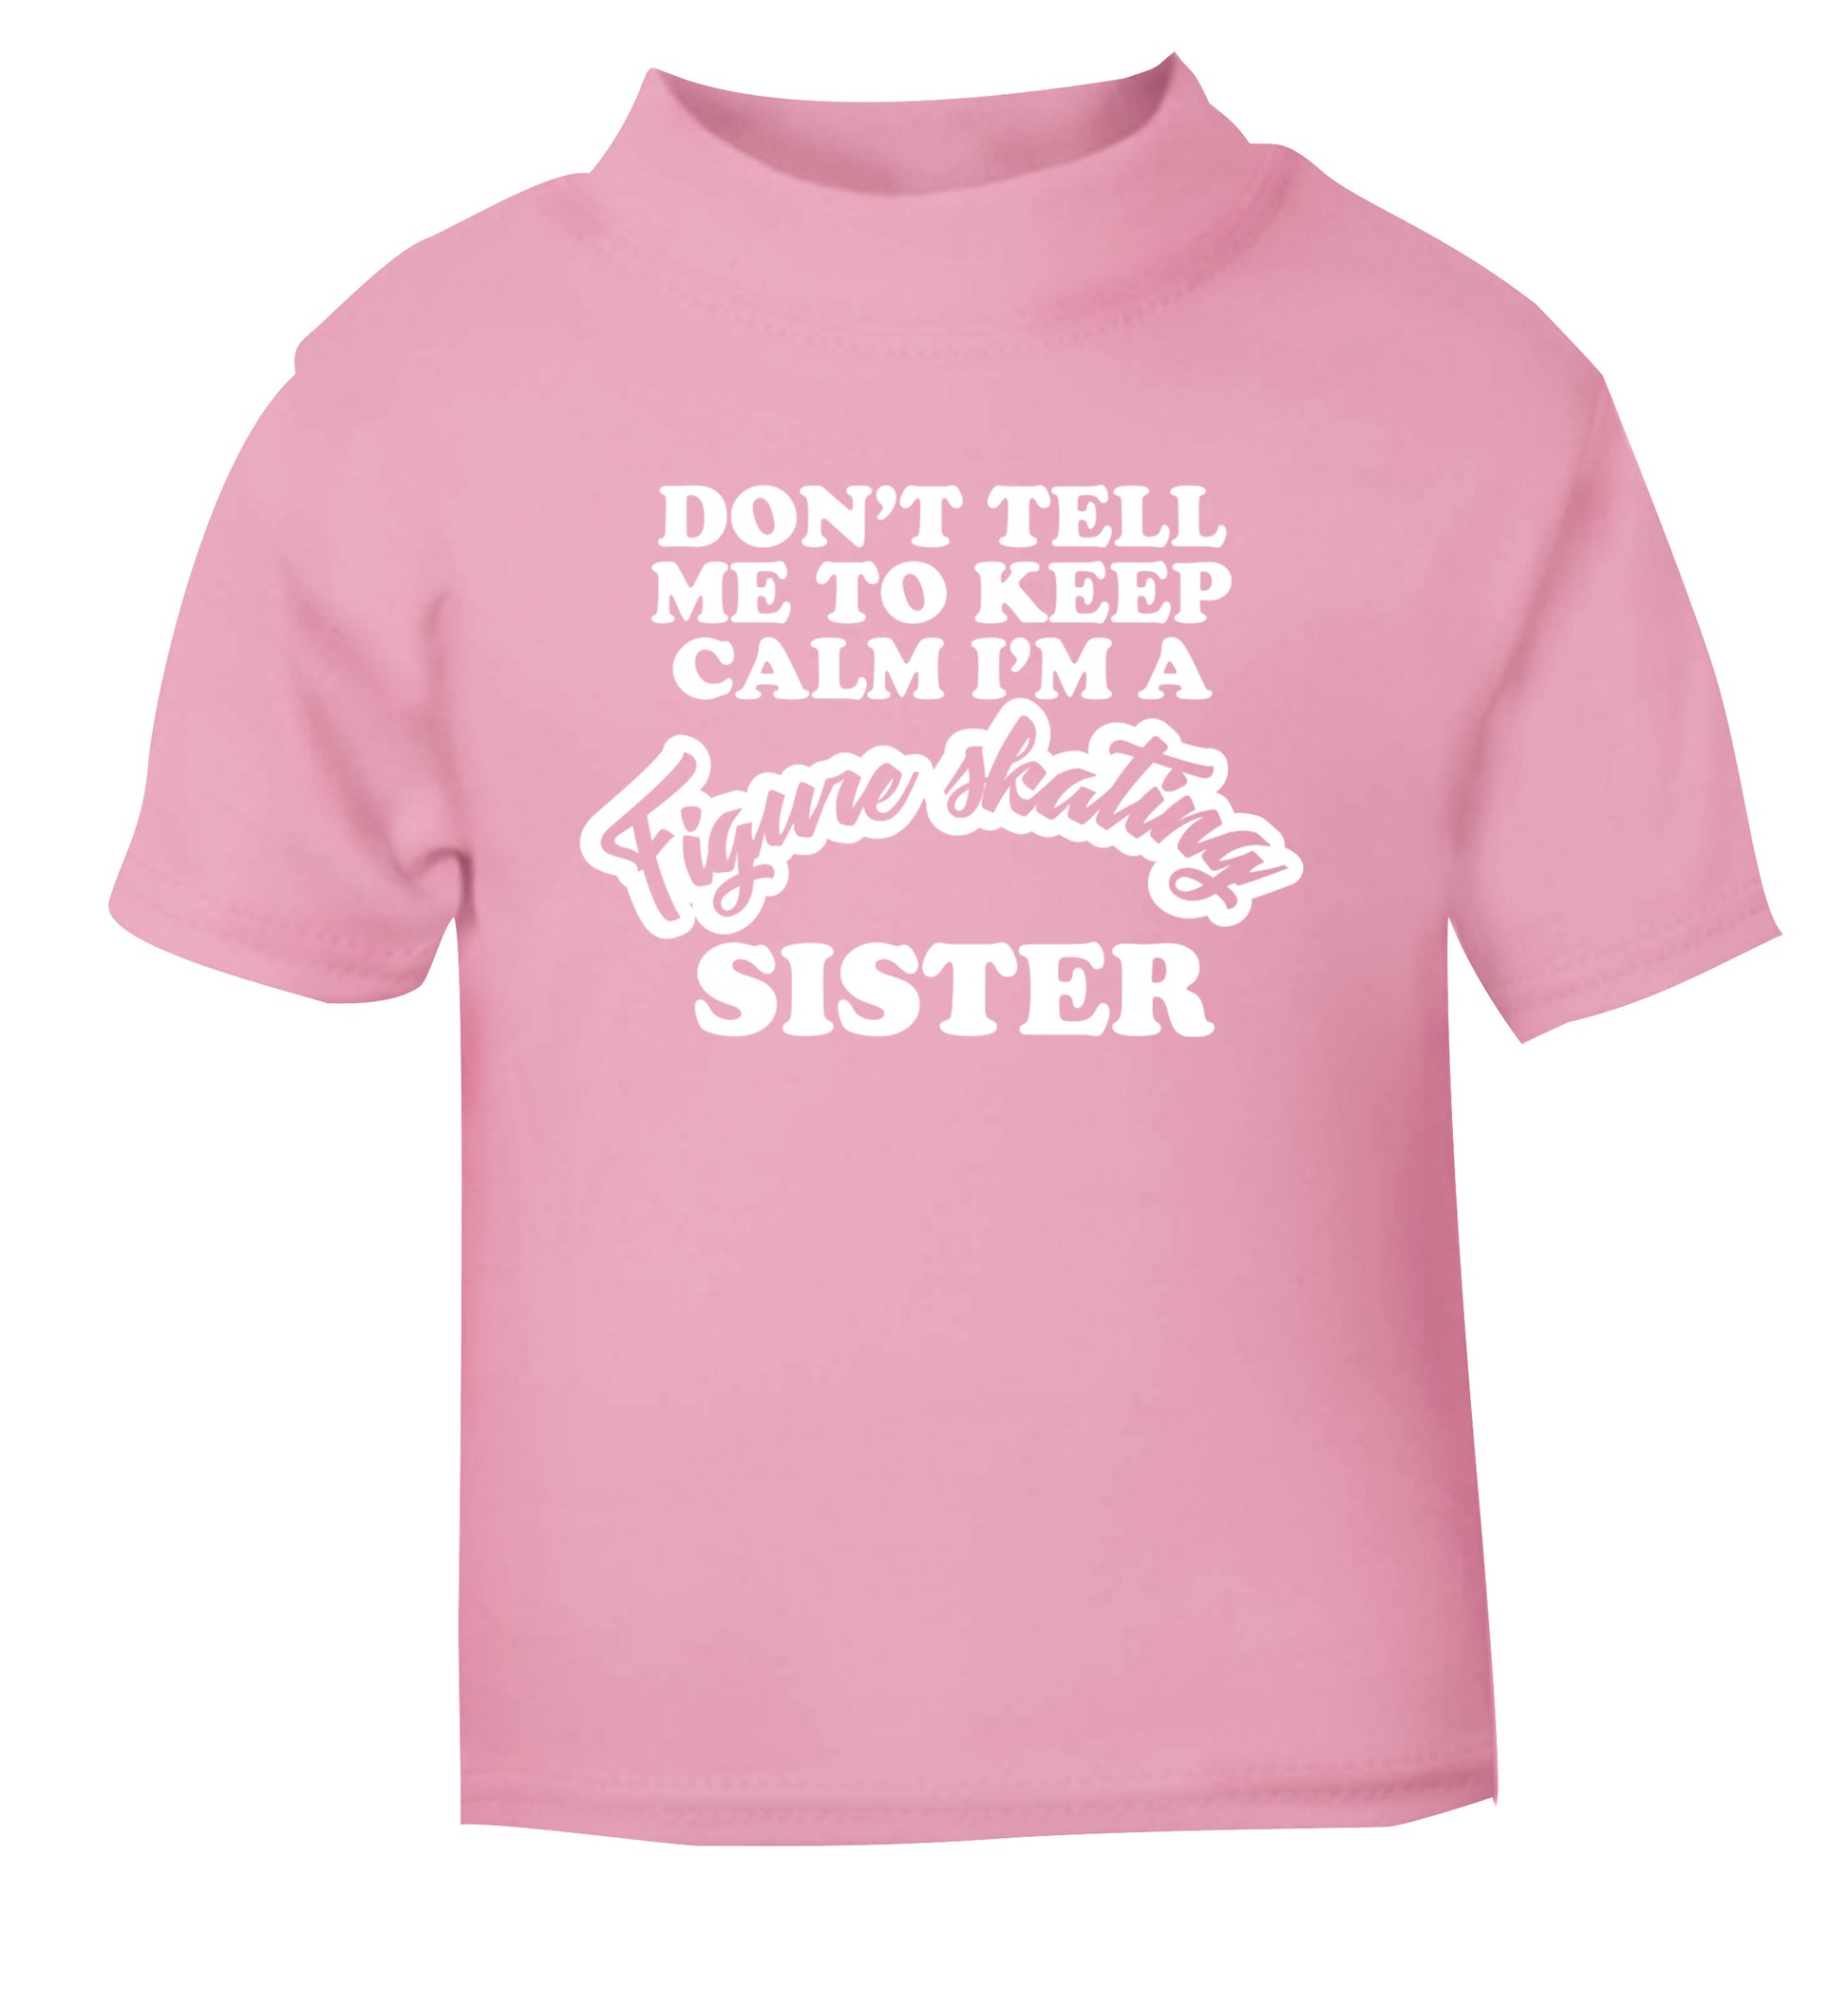 Don't tell me to keep calm I'm a figure skating sister light pink Baby Toddler Tshirt 2 Years